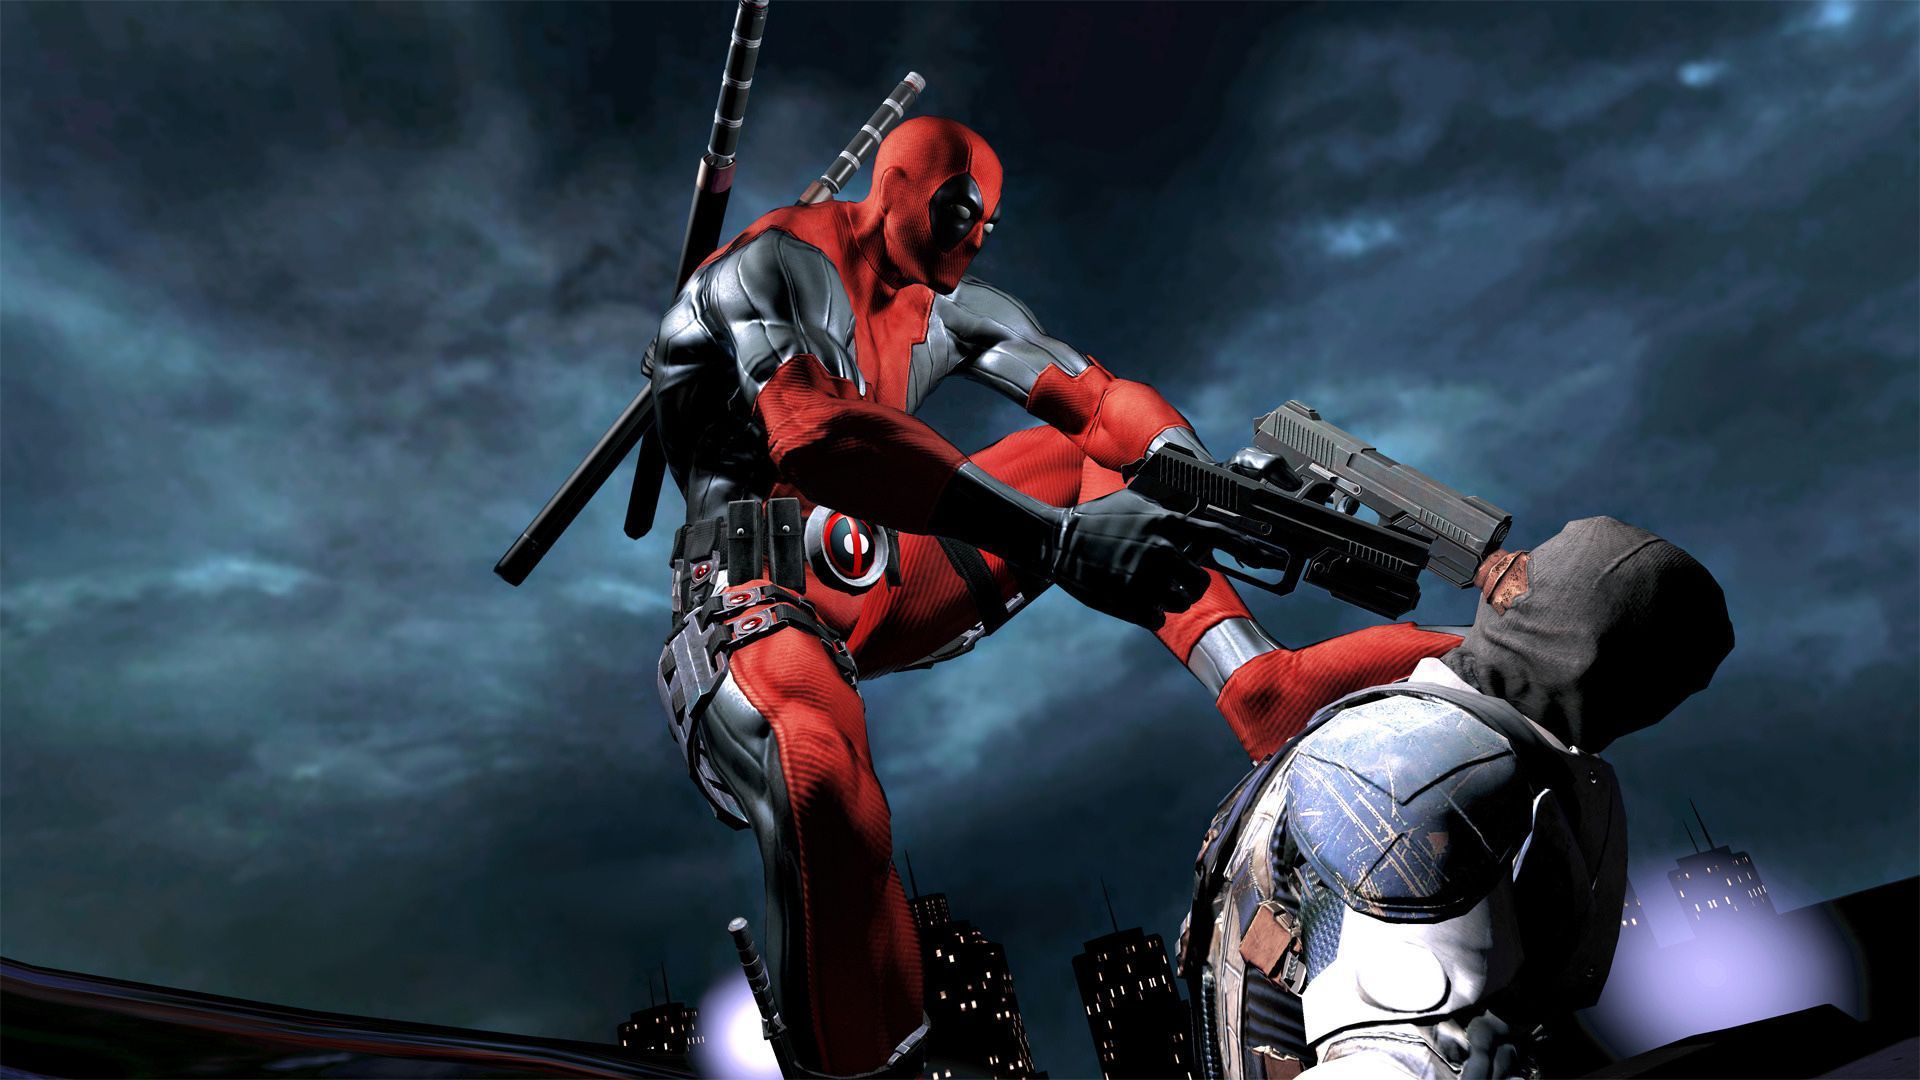 Deadpool Action Wallpapers | HD Games Wallpapers for Mobile and ...